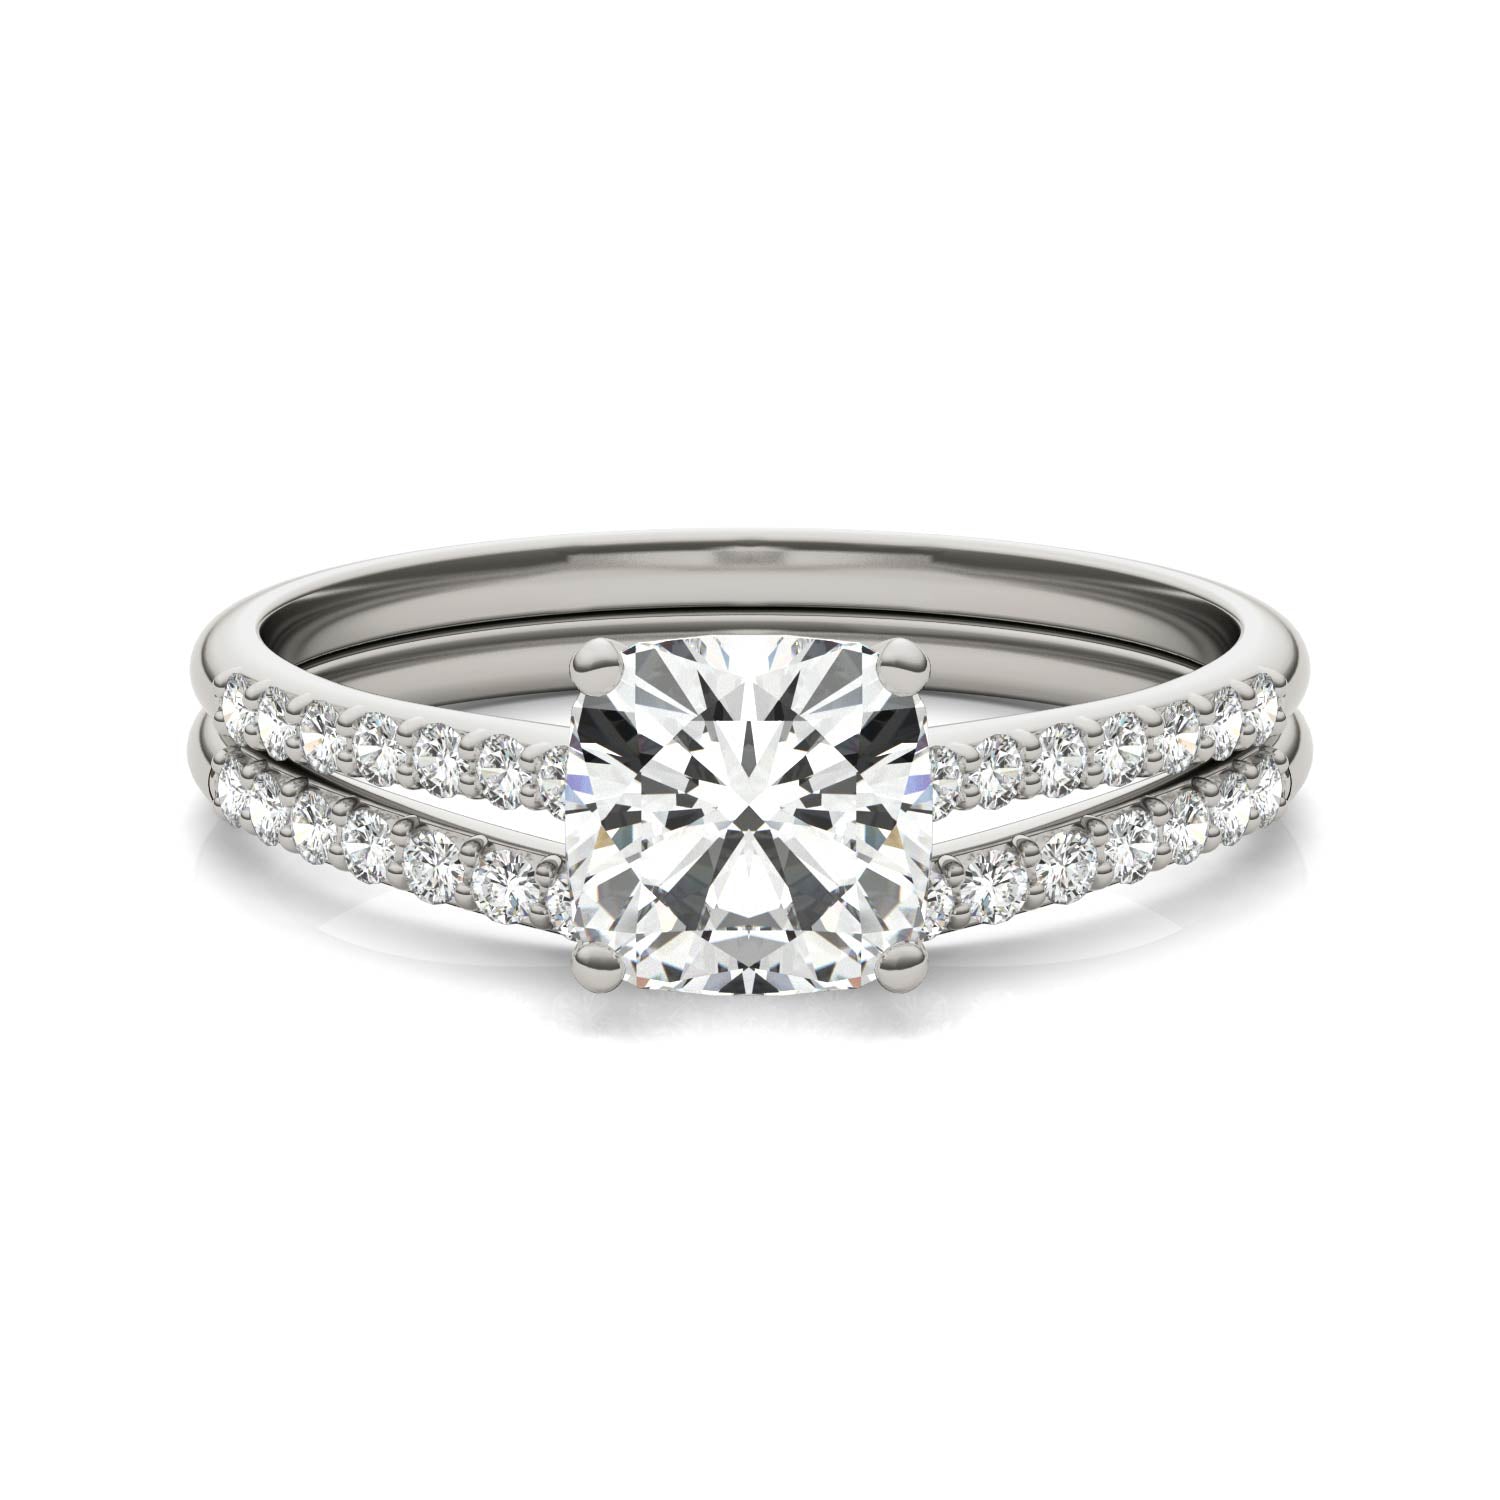 1.33 CTW DEW Cushion Forever One™ Moissanite Signature Bridal Set Cushion with Side Stones Ring